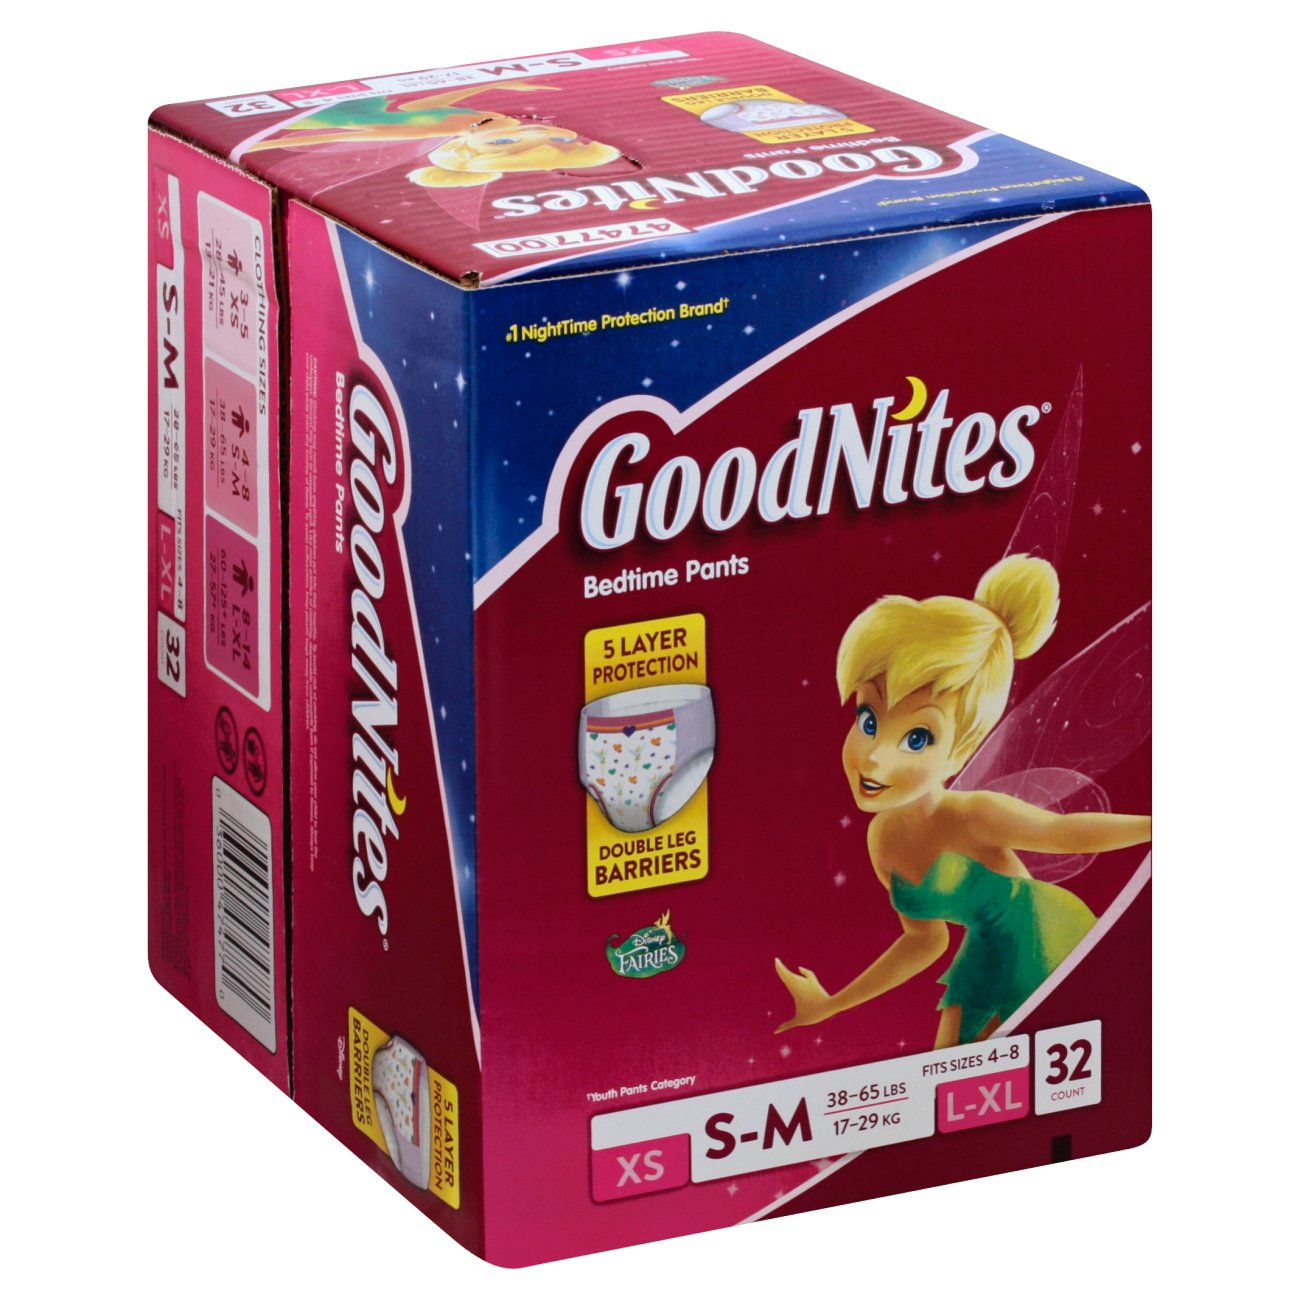 Goodnites Overnight Underwear for Girls - L - Shop Training Pants at H-E-B